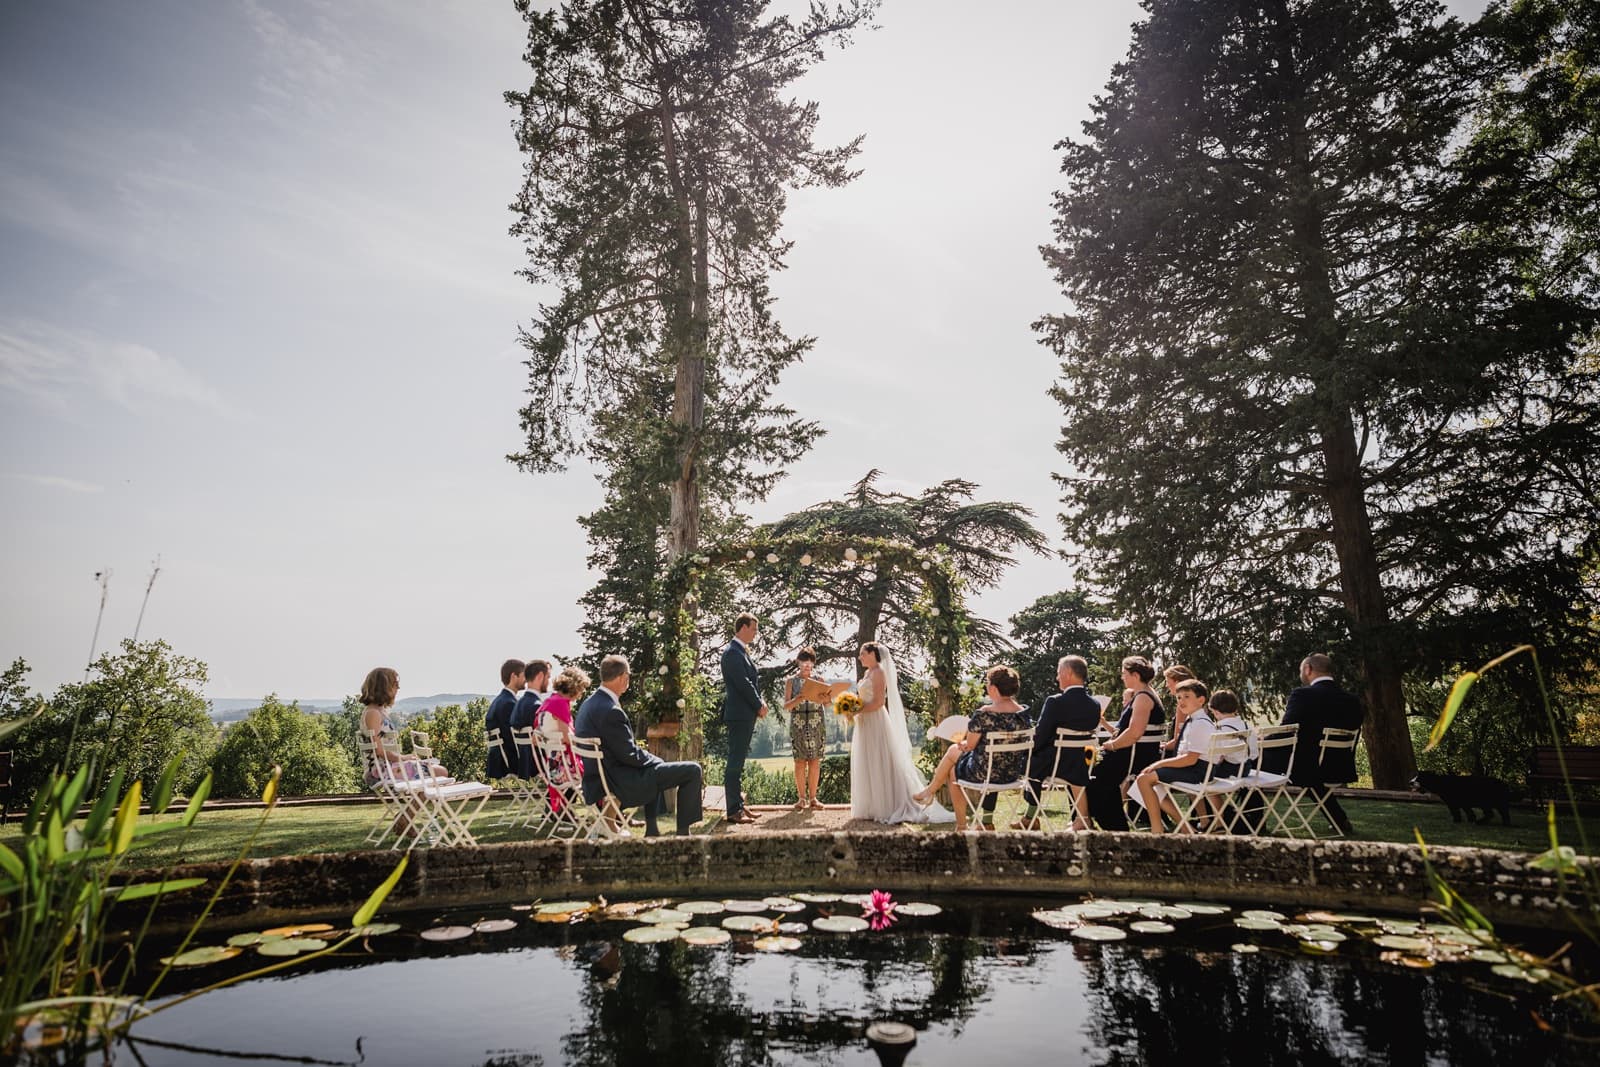 A wedding ceremony in the grounds of Chateau de Brametourte in France